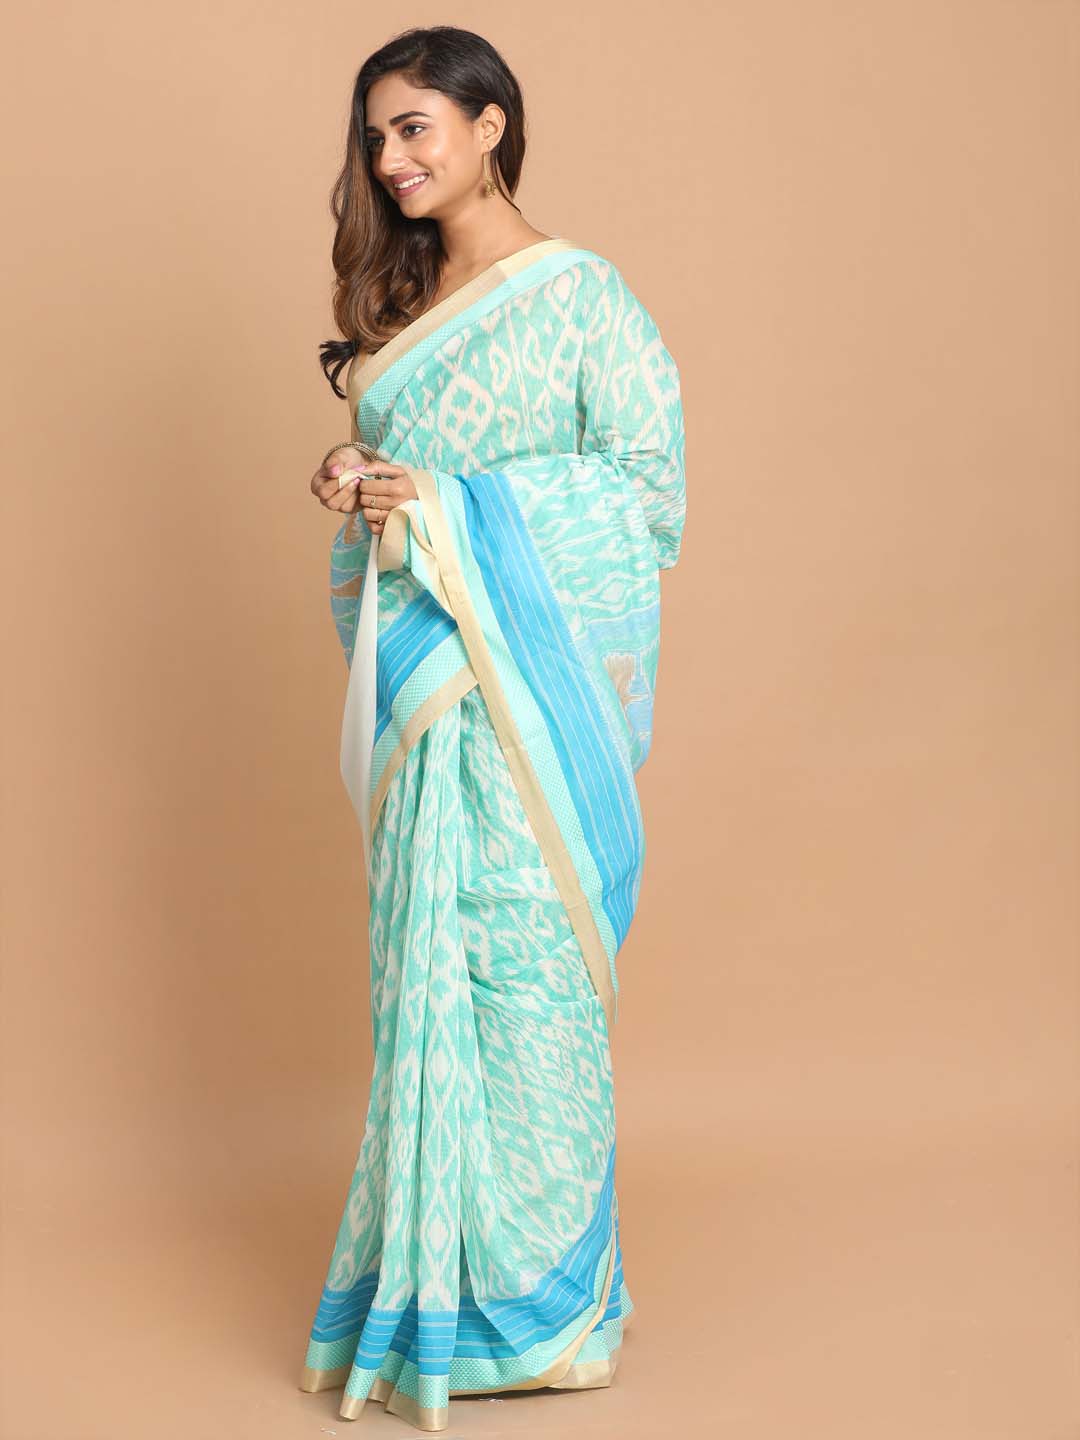 Indethnic Printed Cotton Blend Saree in Green - View 1